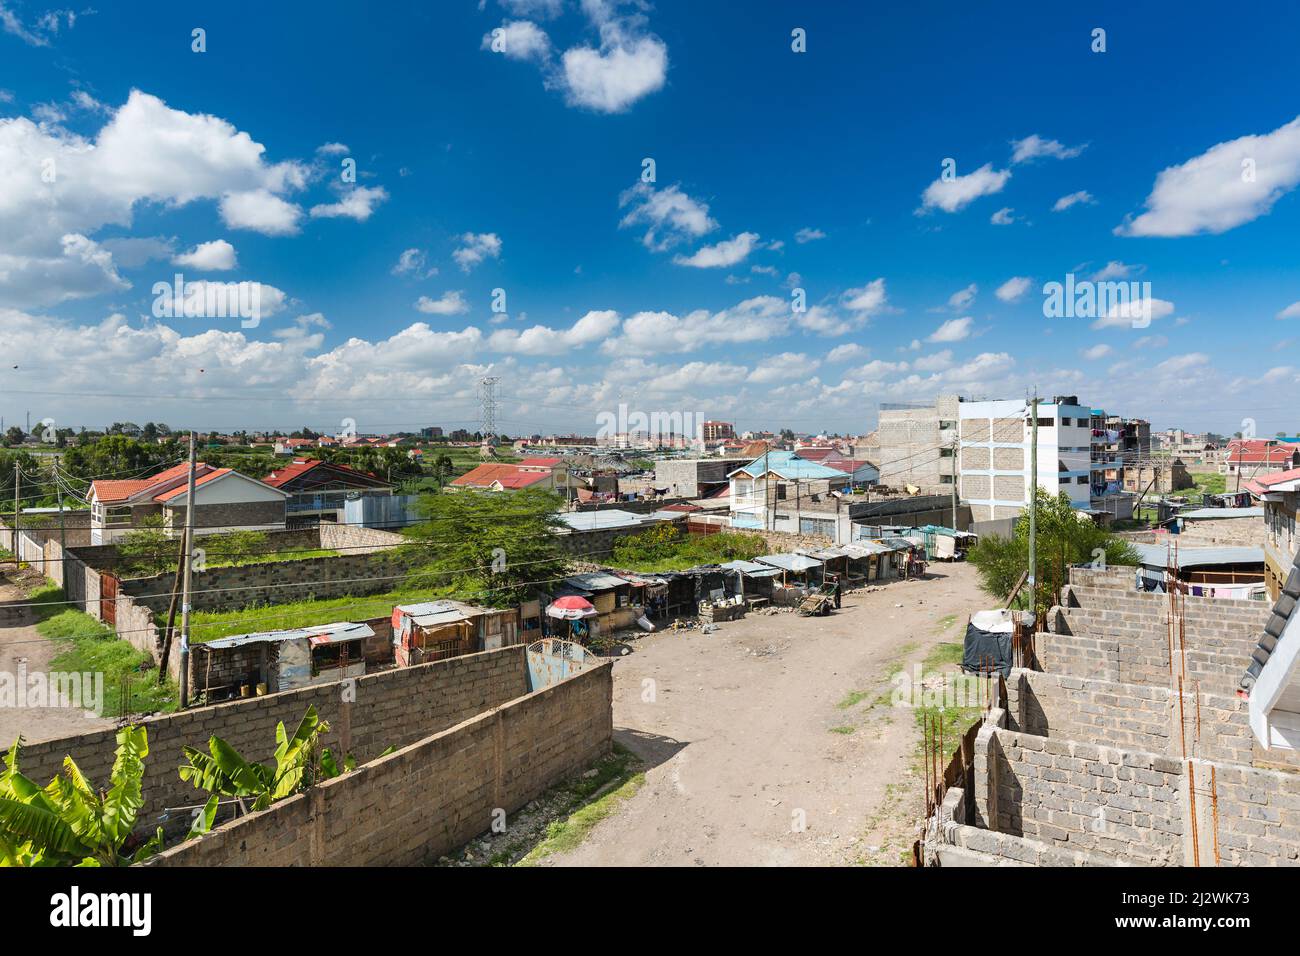 Nairobi suburbs street view in the Tassia district, Kenya with the typical small shops at the intersection. Stock Photo